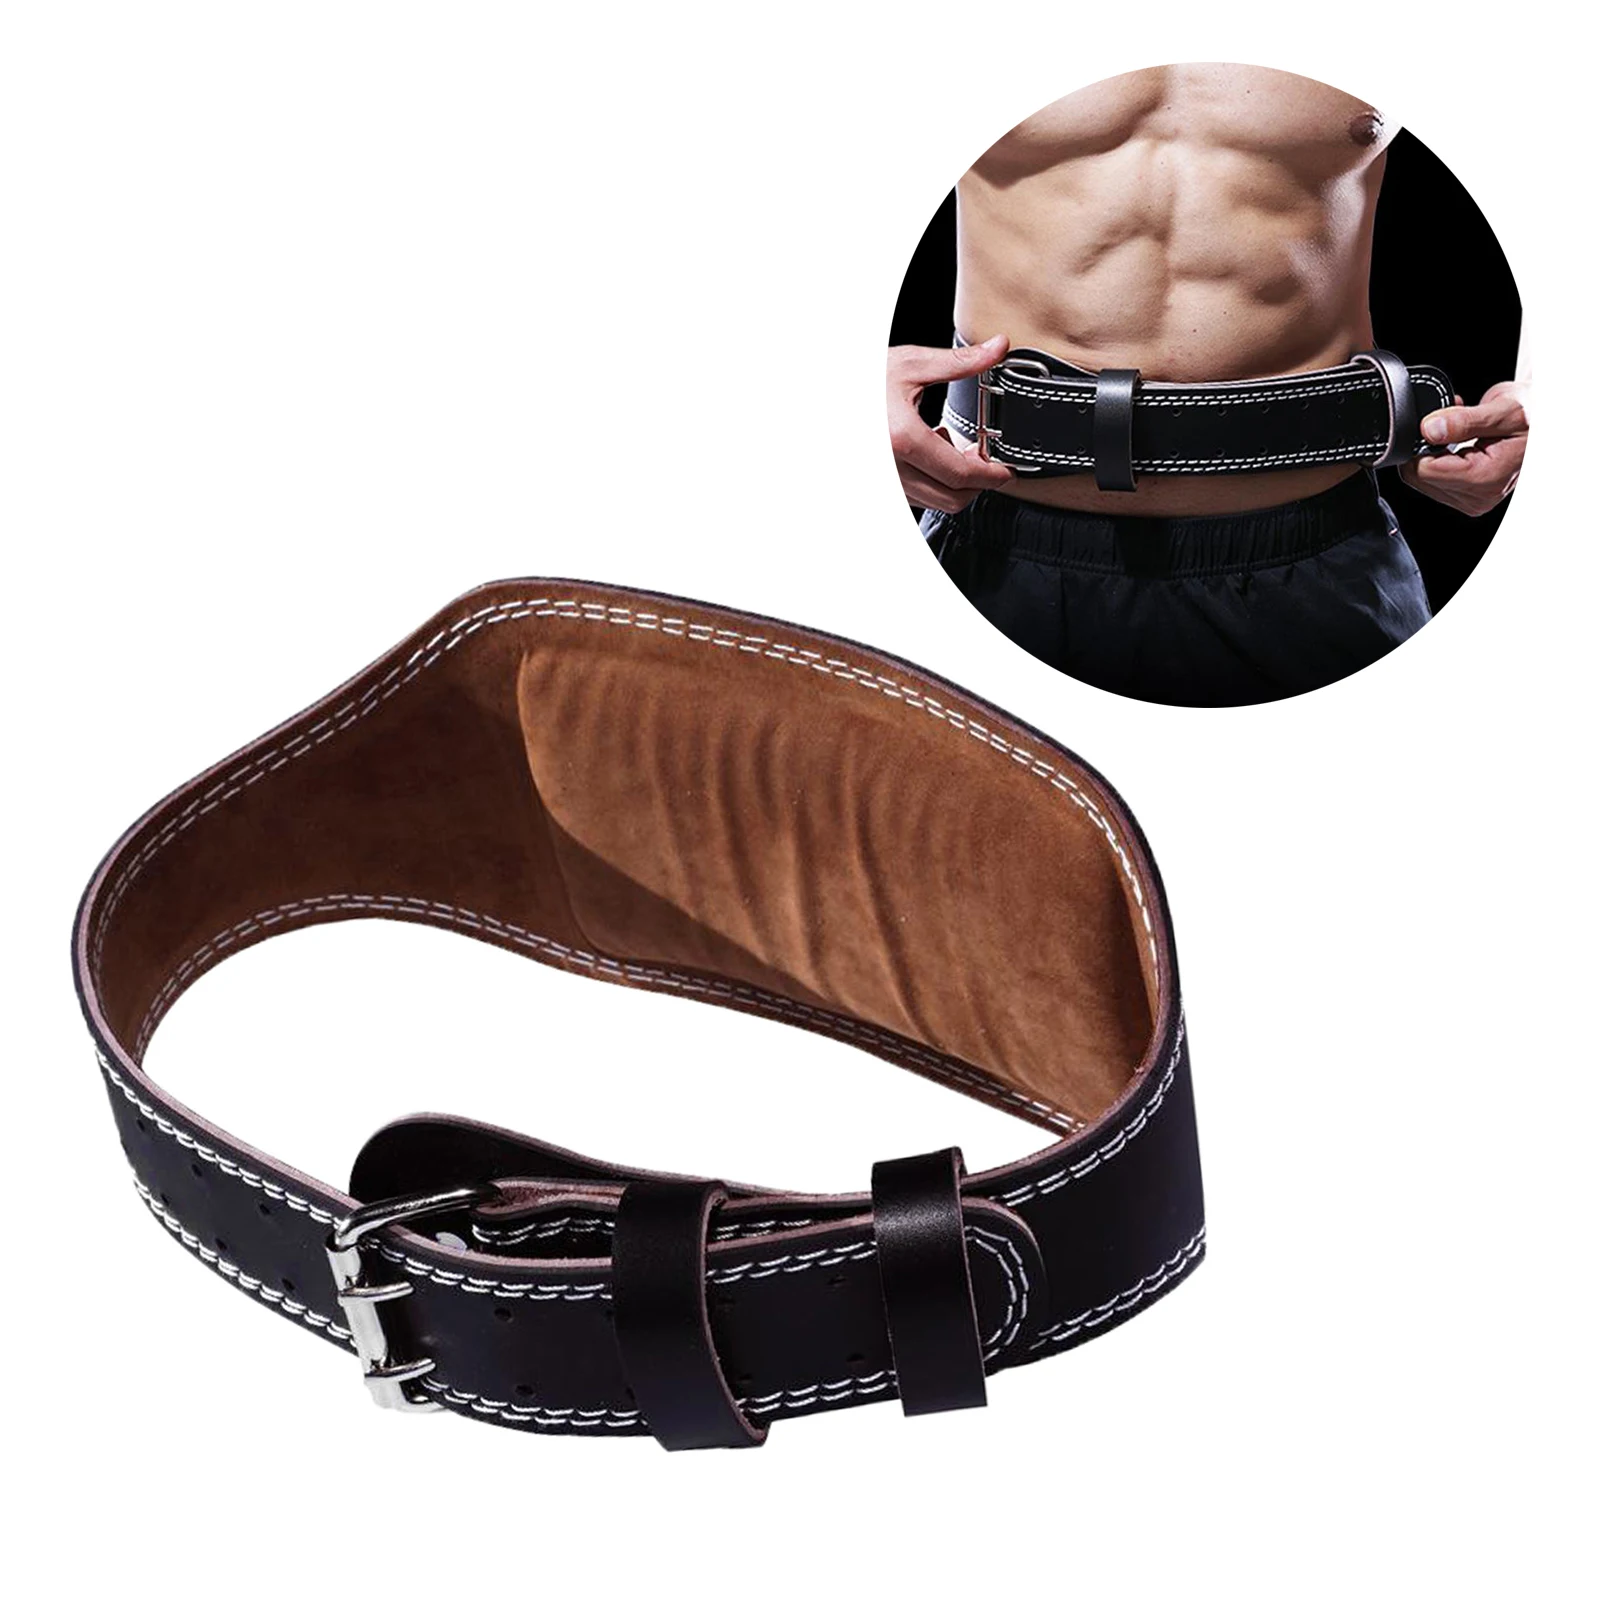 PU Leather Weight Lifting Belt Gym Fitness Crossifit Dumbbell Barbell Powerlifting Back Support Power Training for Women Men